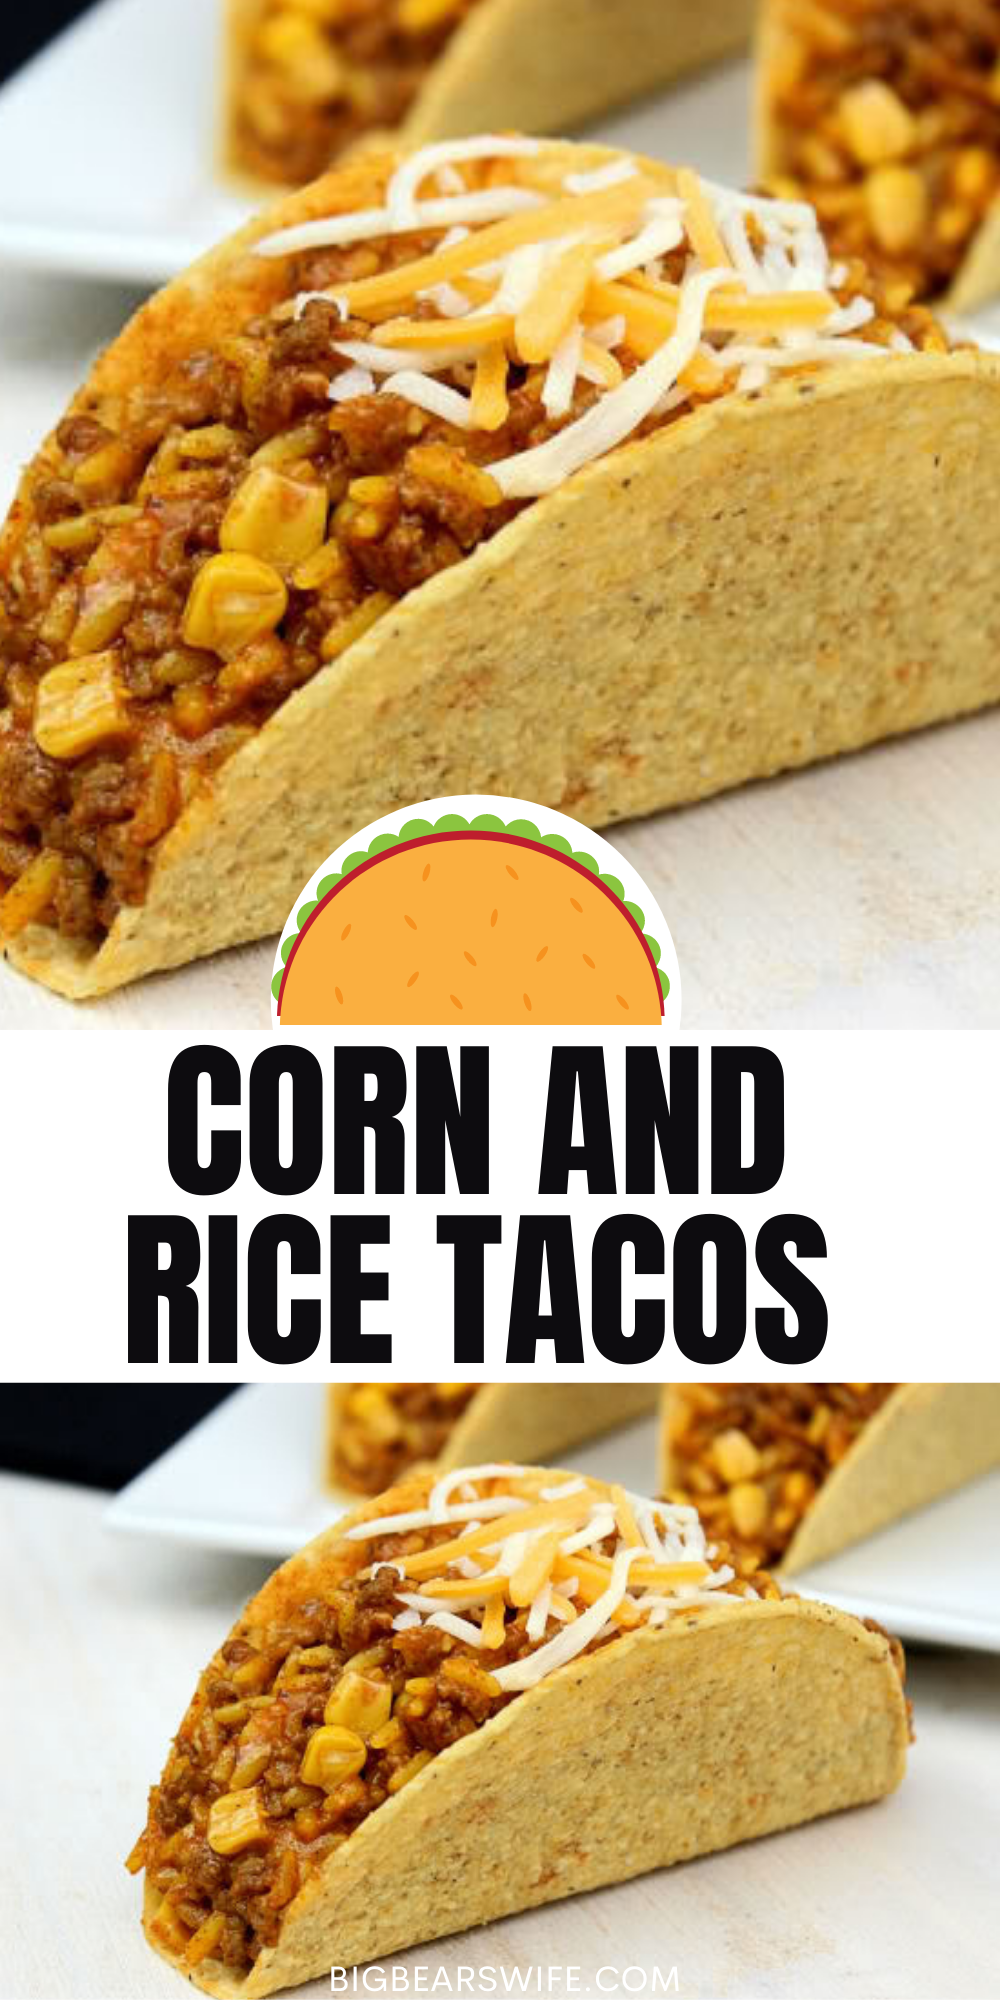 An easy dinner idea that's a favorite in our house! Corn and Rice Tacos are made of beef, taco mix, corn and cheese! Super simple and always delicious!  via @bigbearswife